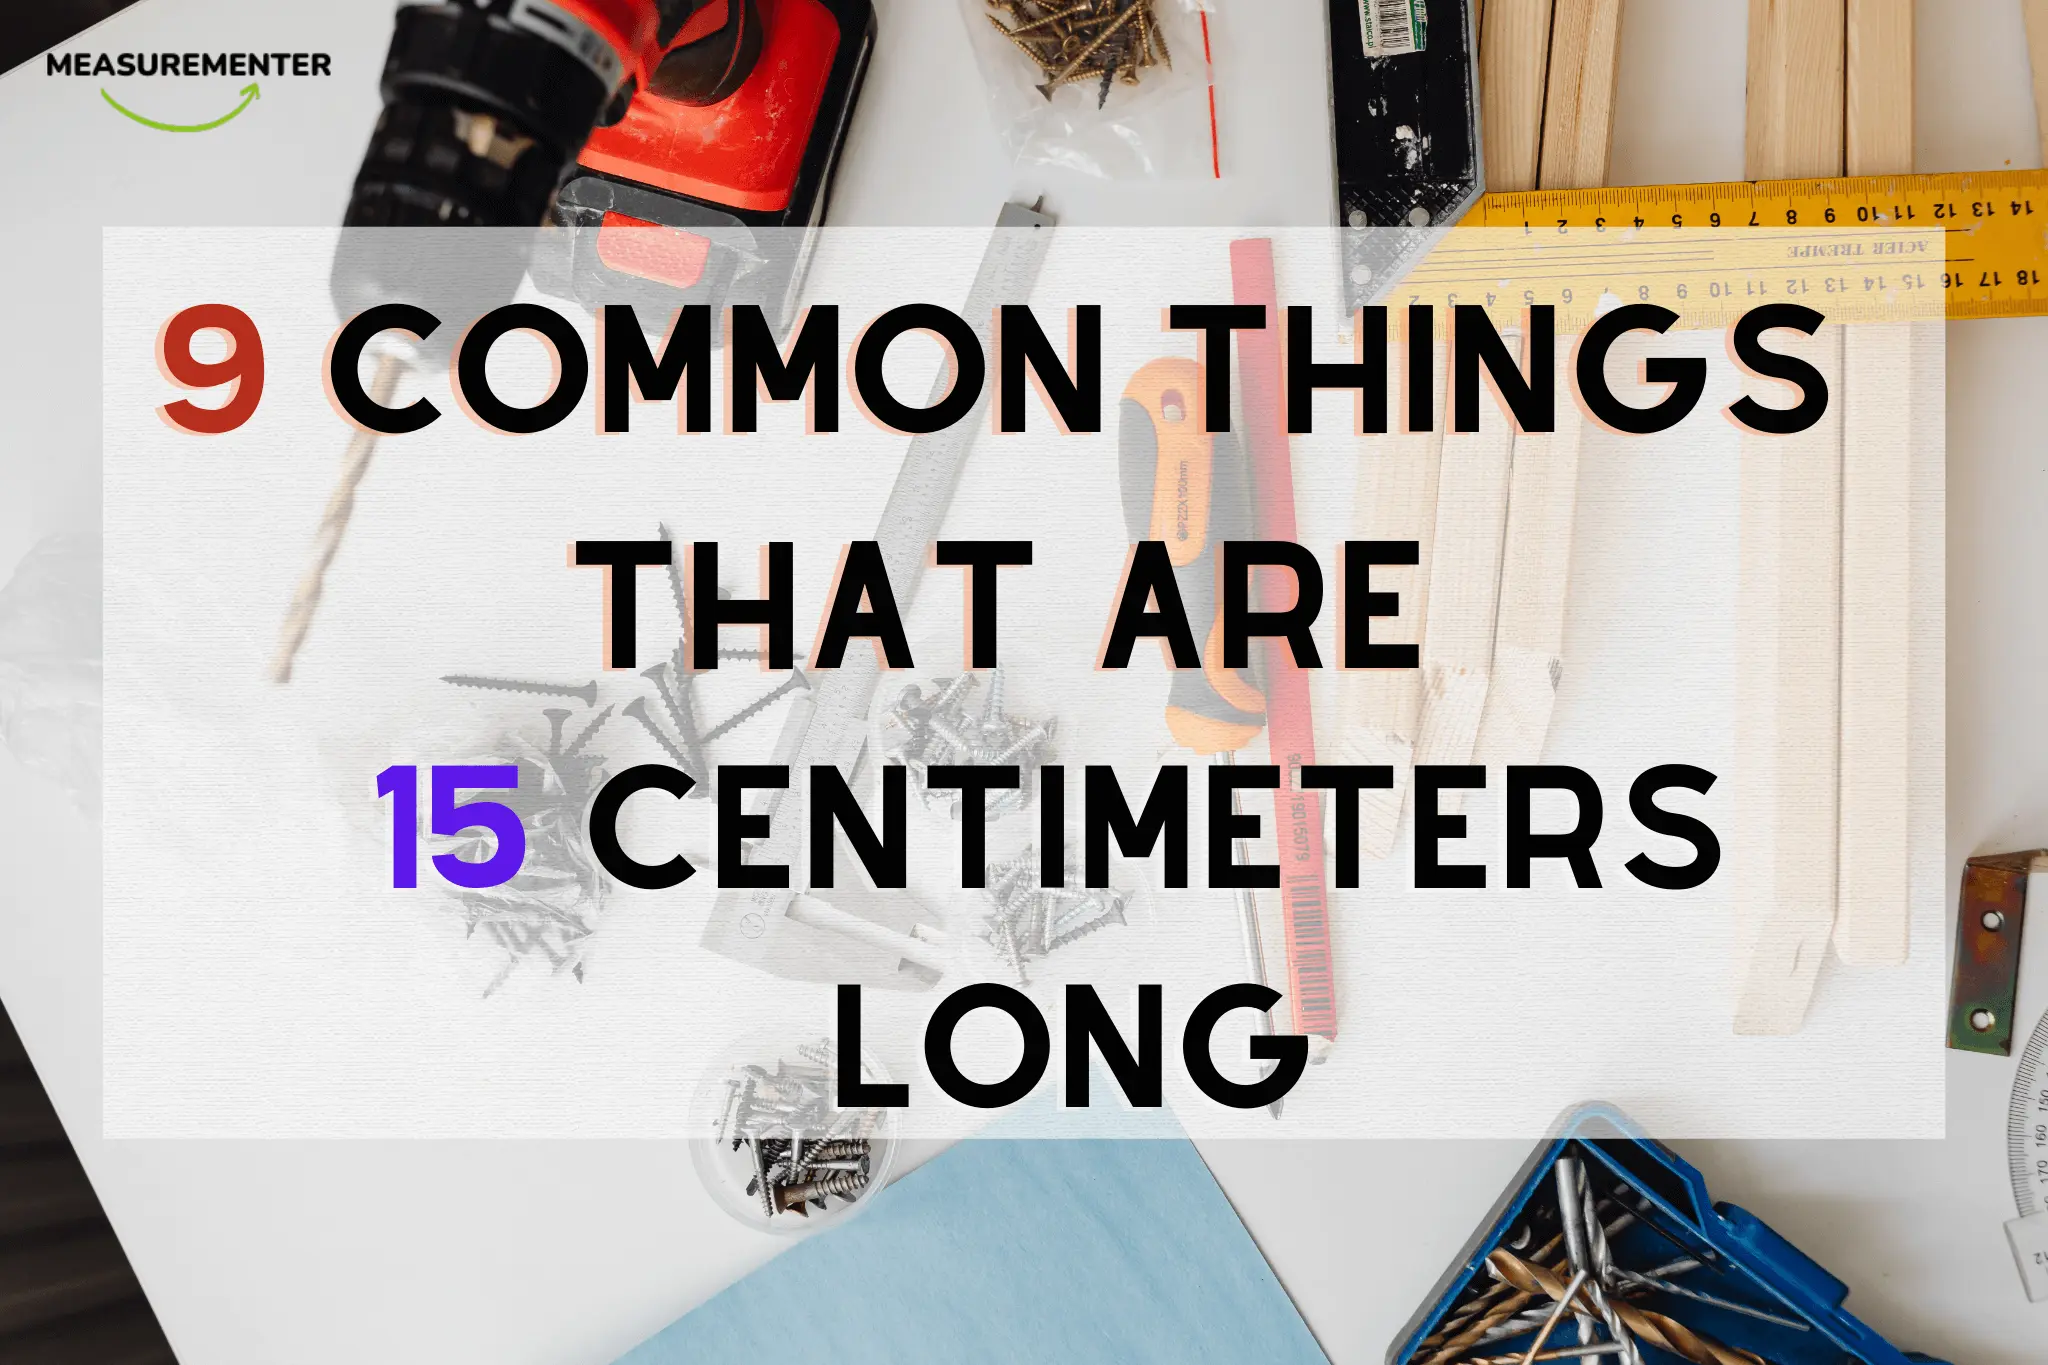 9 Common things that are 15 centimeters long. How long is 15 centimeters